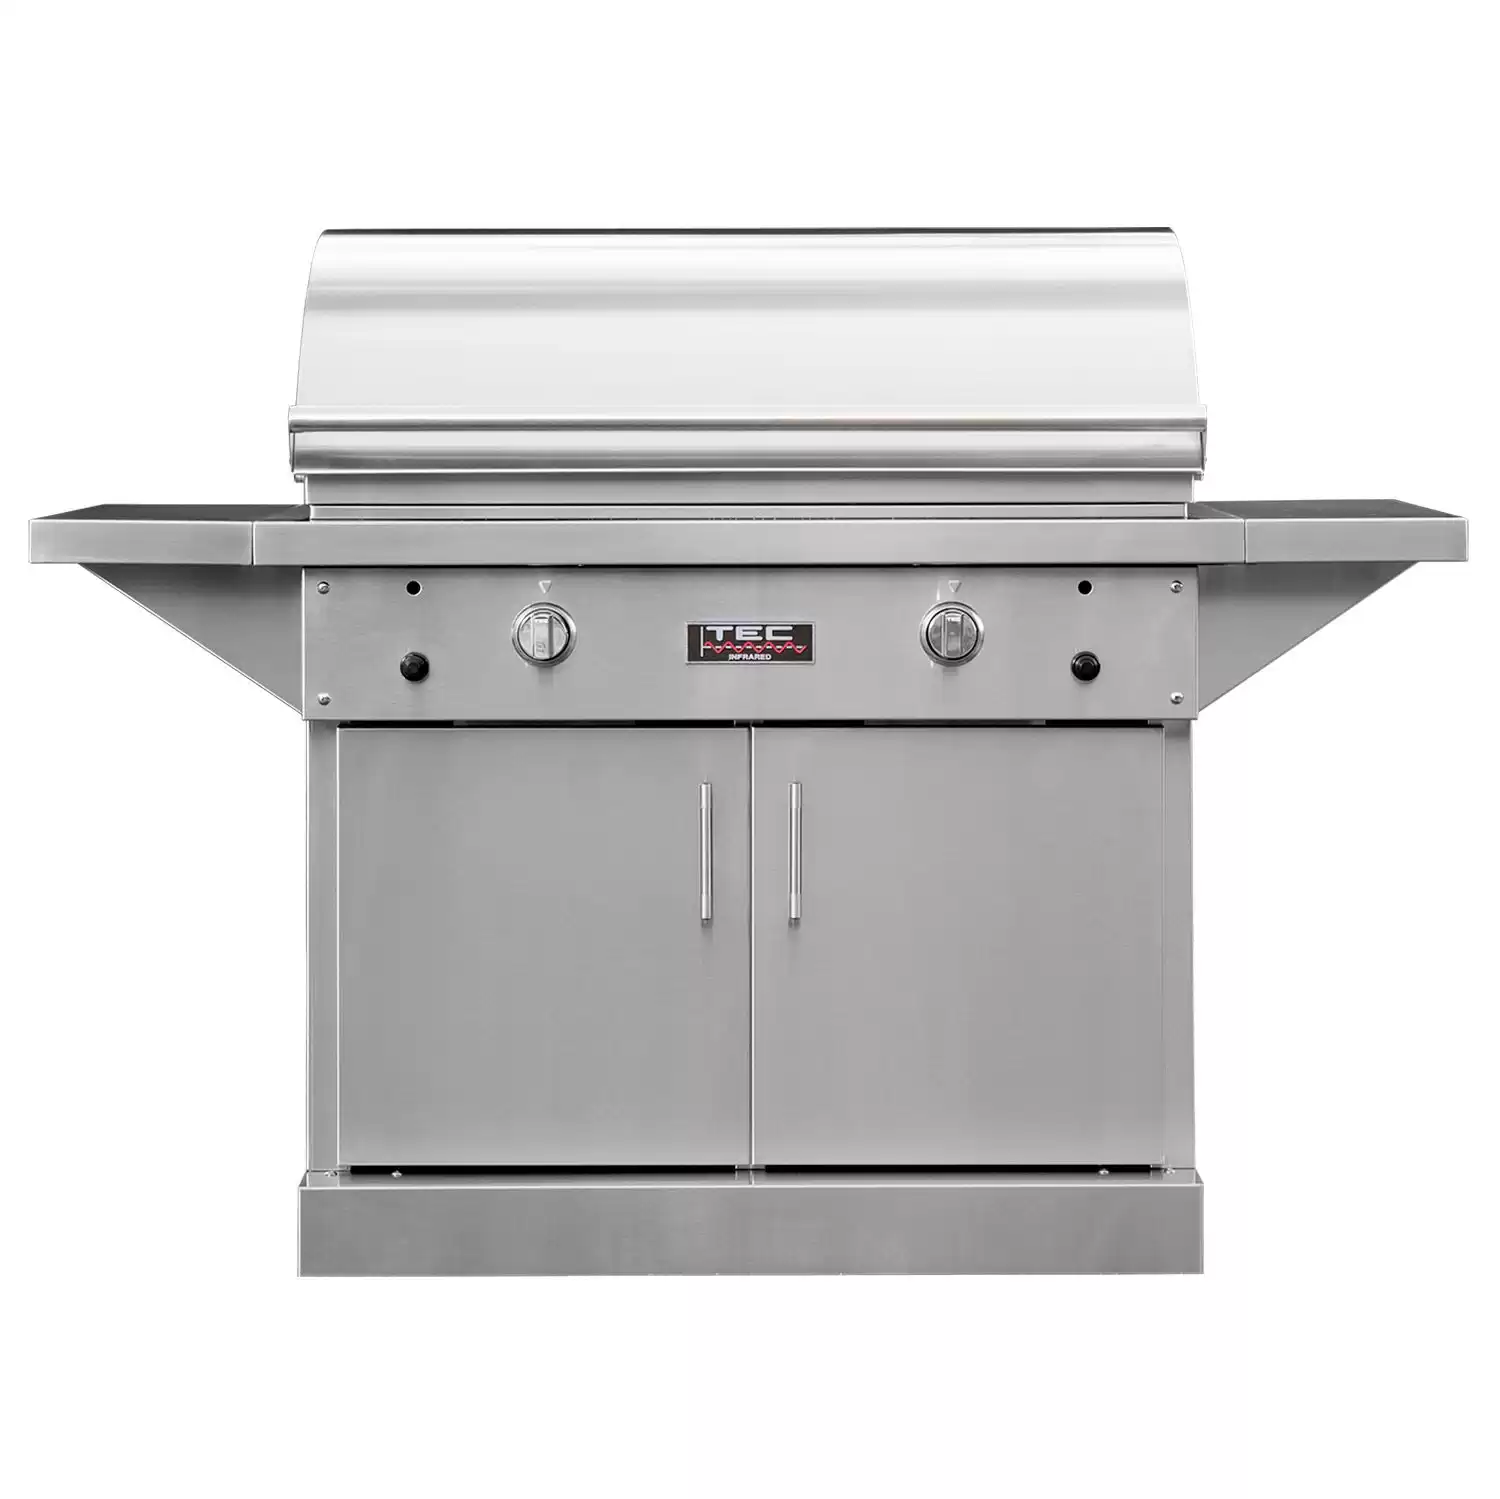 TEC Patio 2 FR Infrared Grill On Stainless Steel Pedestal with Two Side Shelves and Full Warming Rack (PFR2NTCABS-PFR2WR39), Natural Gas